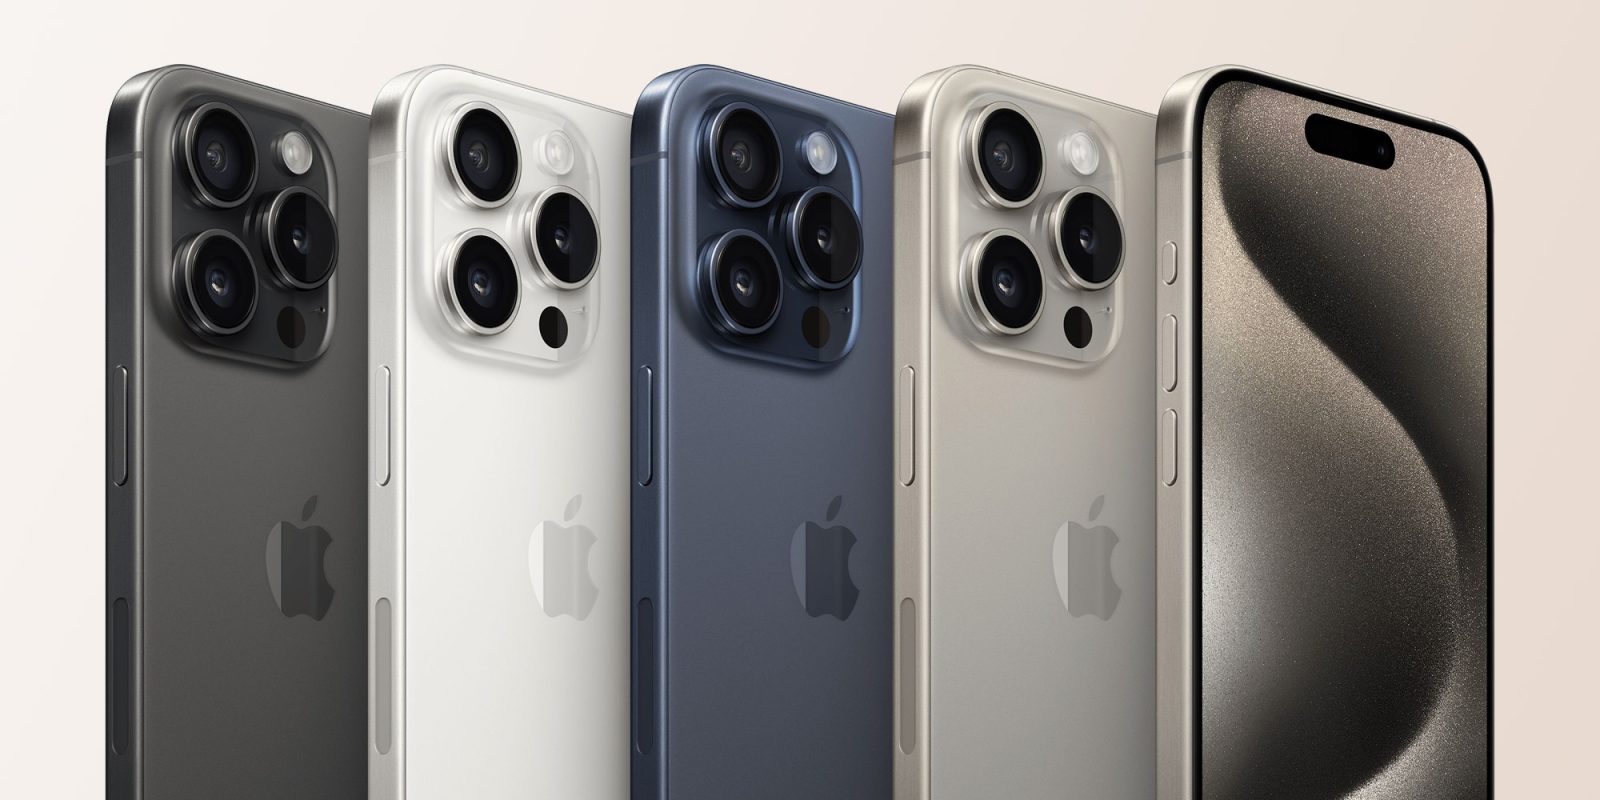 Poll which iphone 15 pro color do you think is